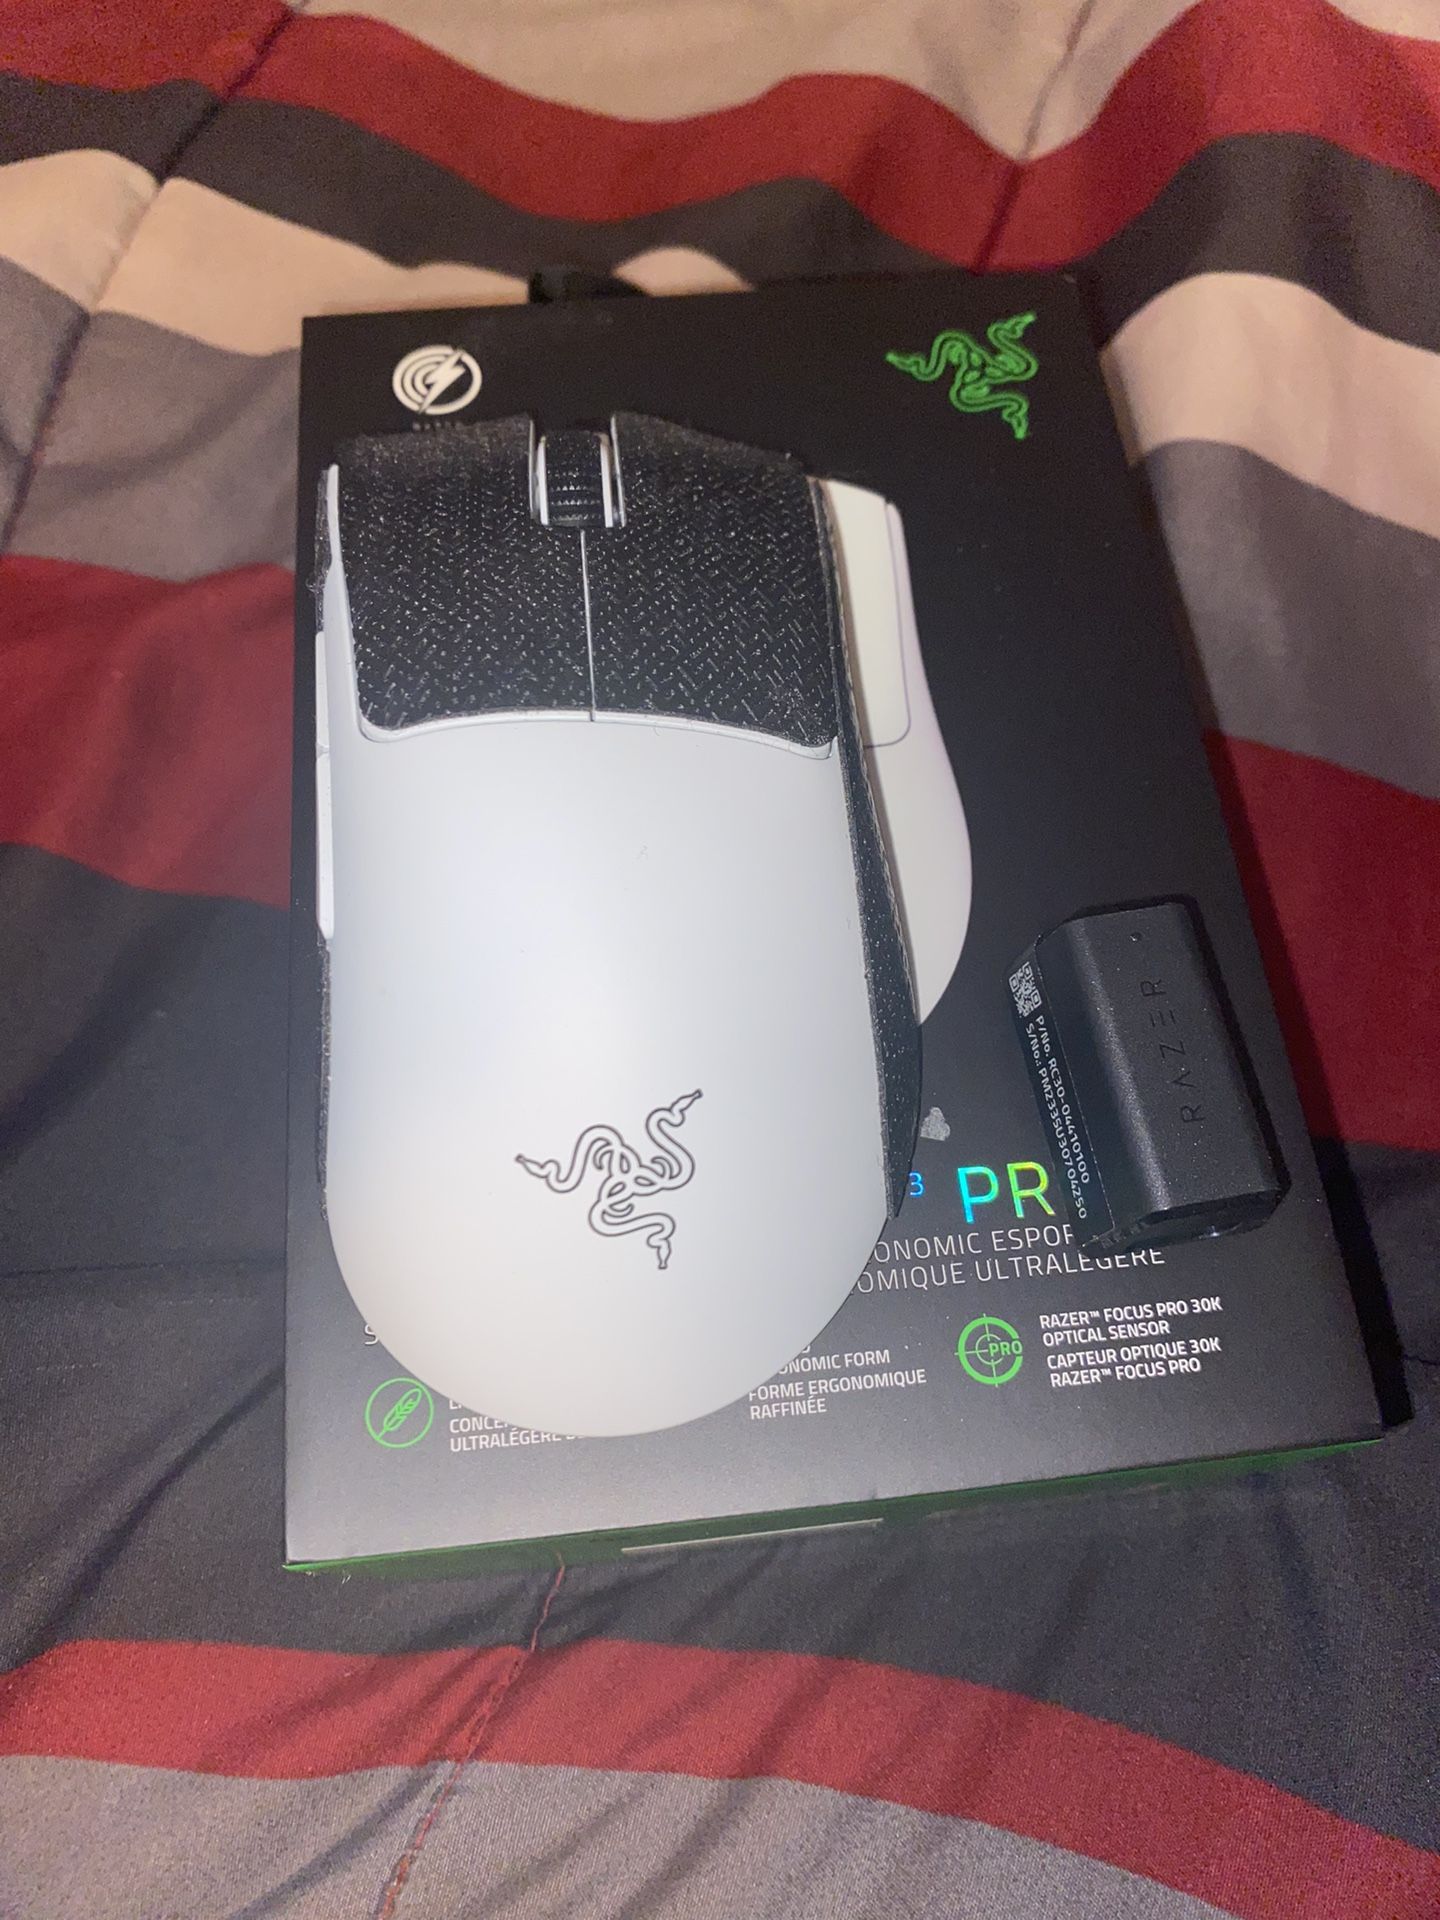 Razer Deathadder V3 Pro with Hyperpolling 4K dongle/Corepad air skates